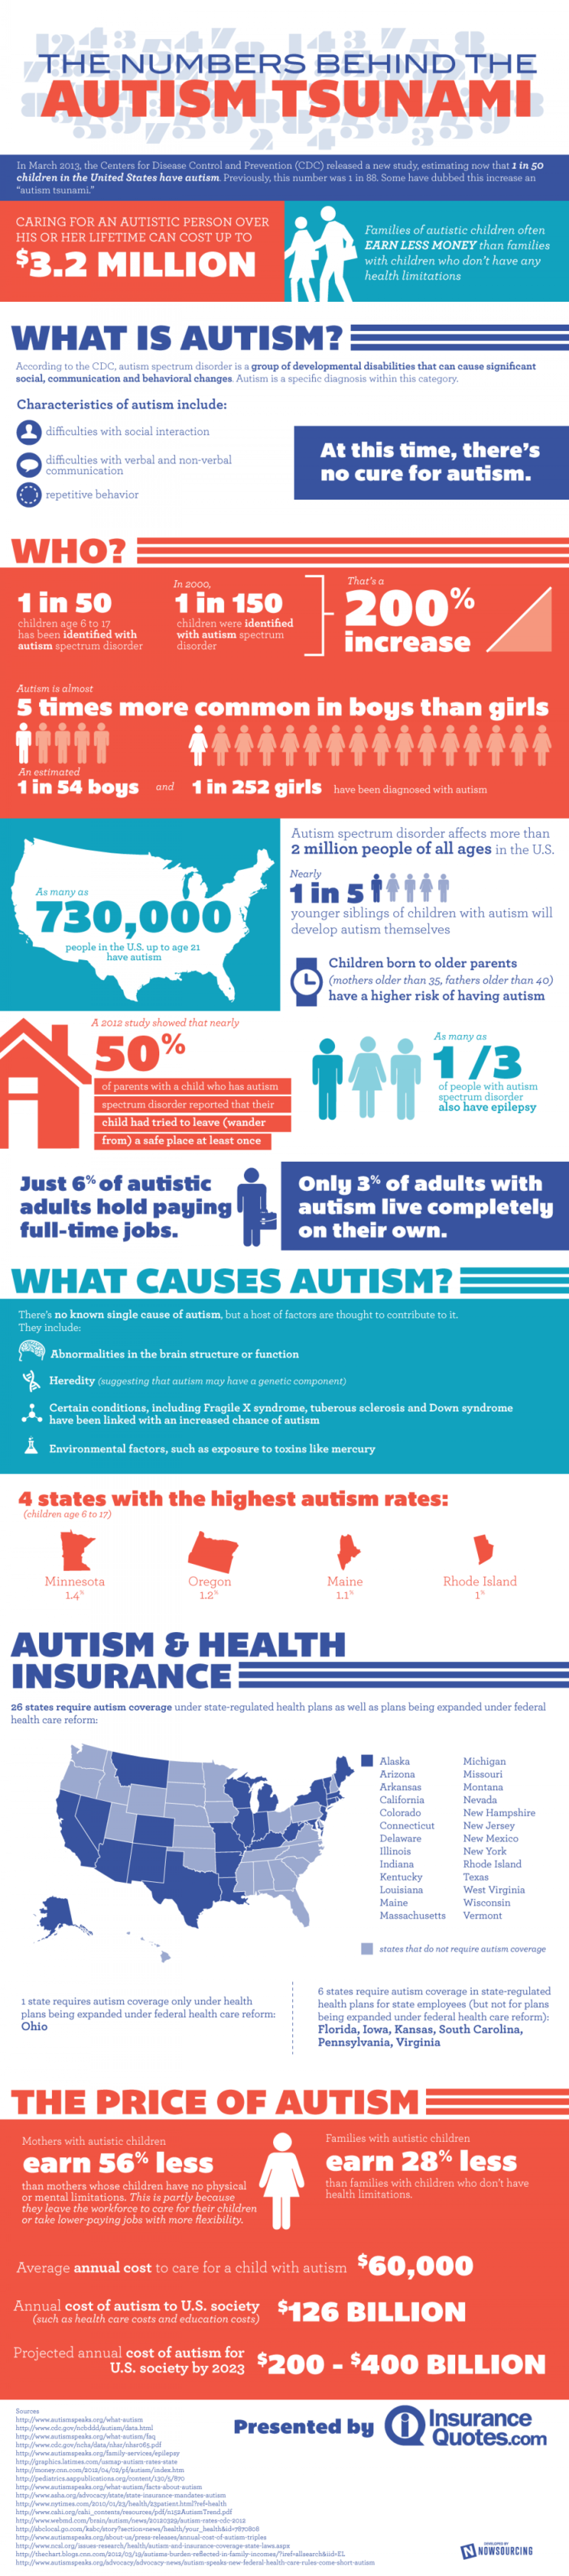 The Numbers Behind the Autism Tsunami Infographic